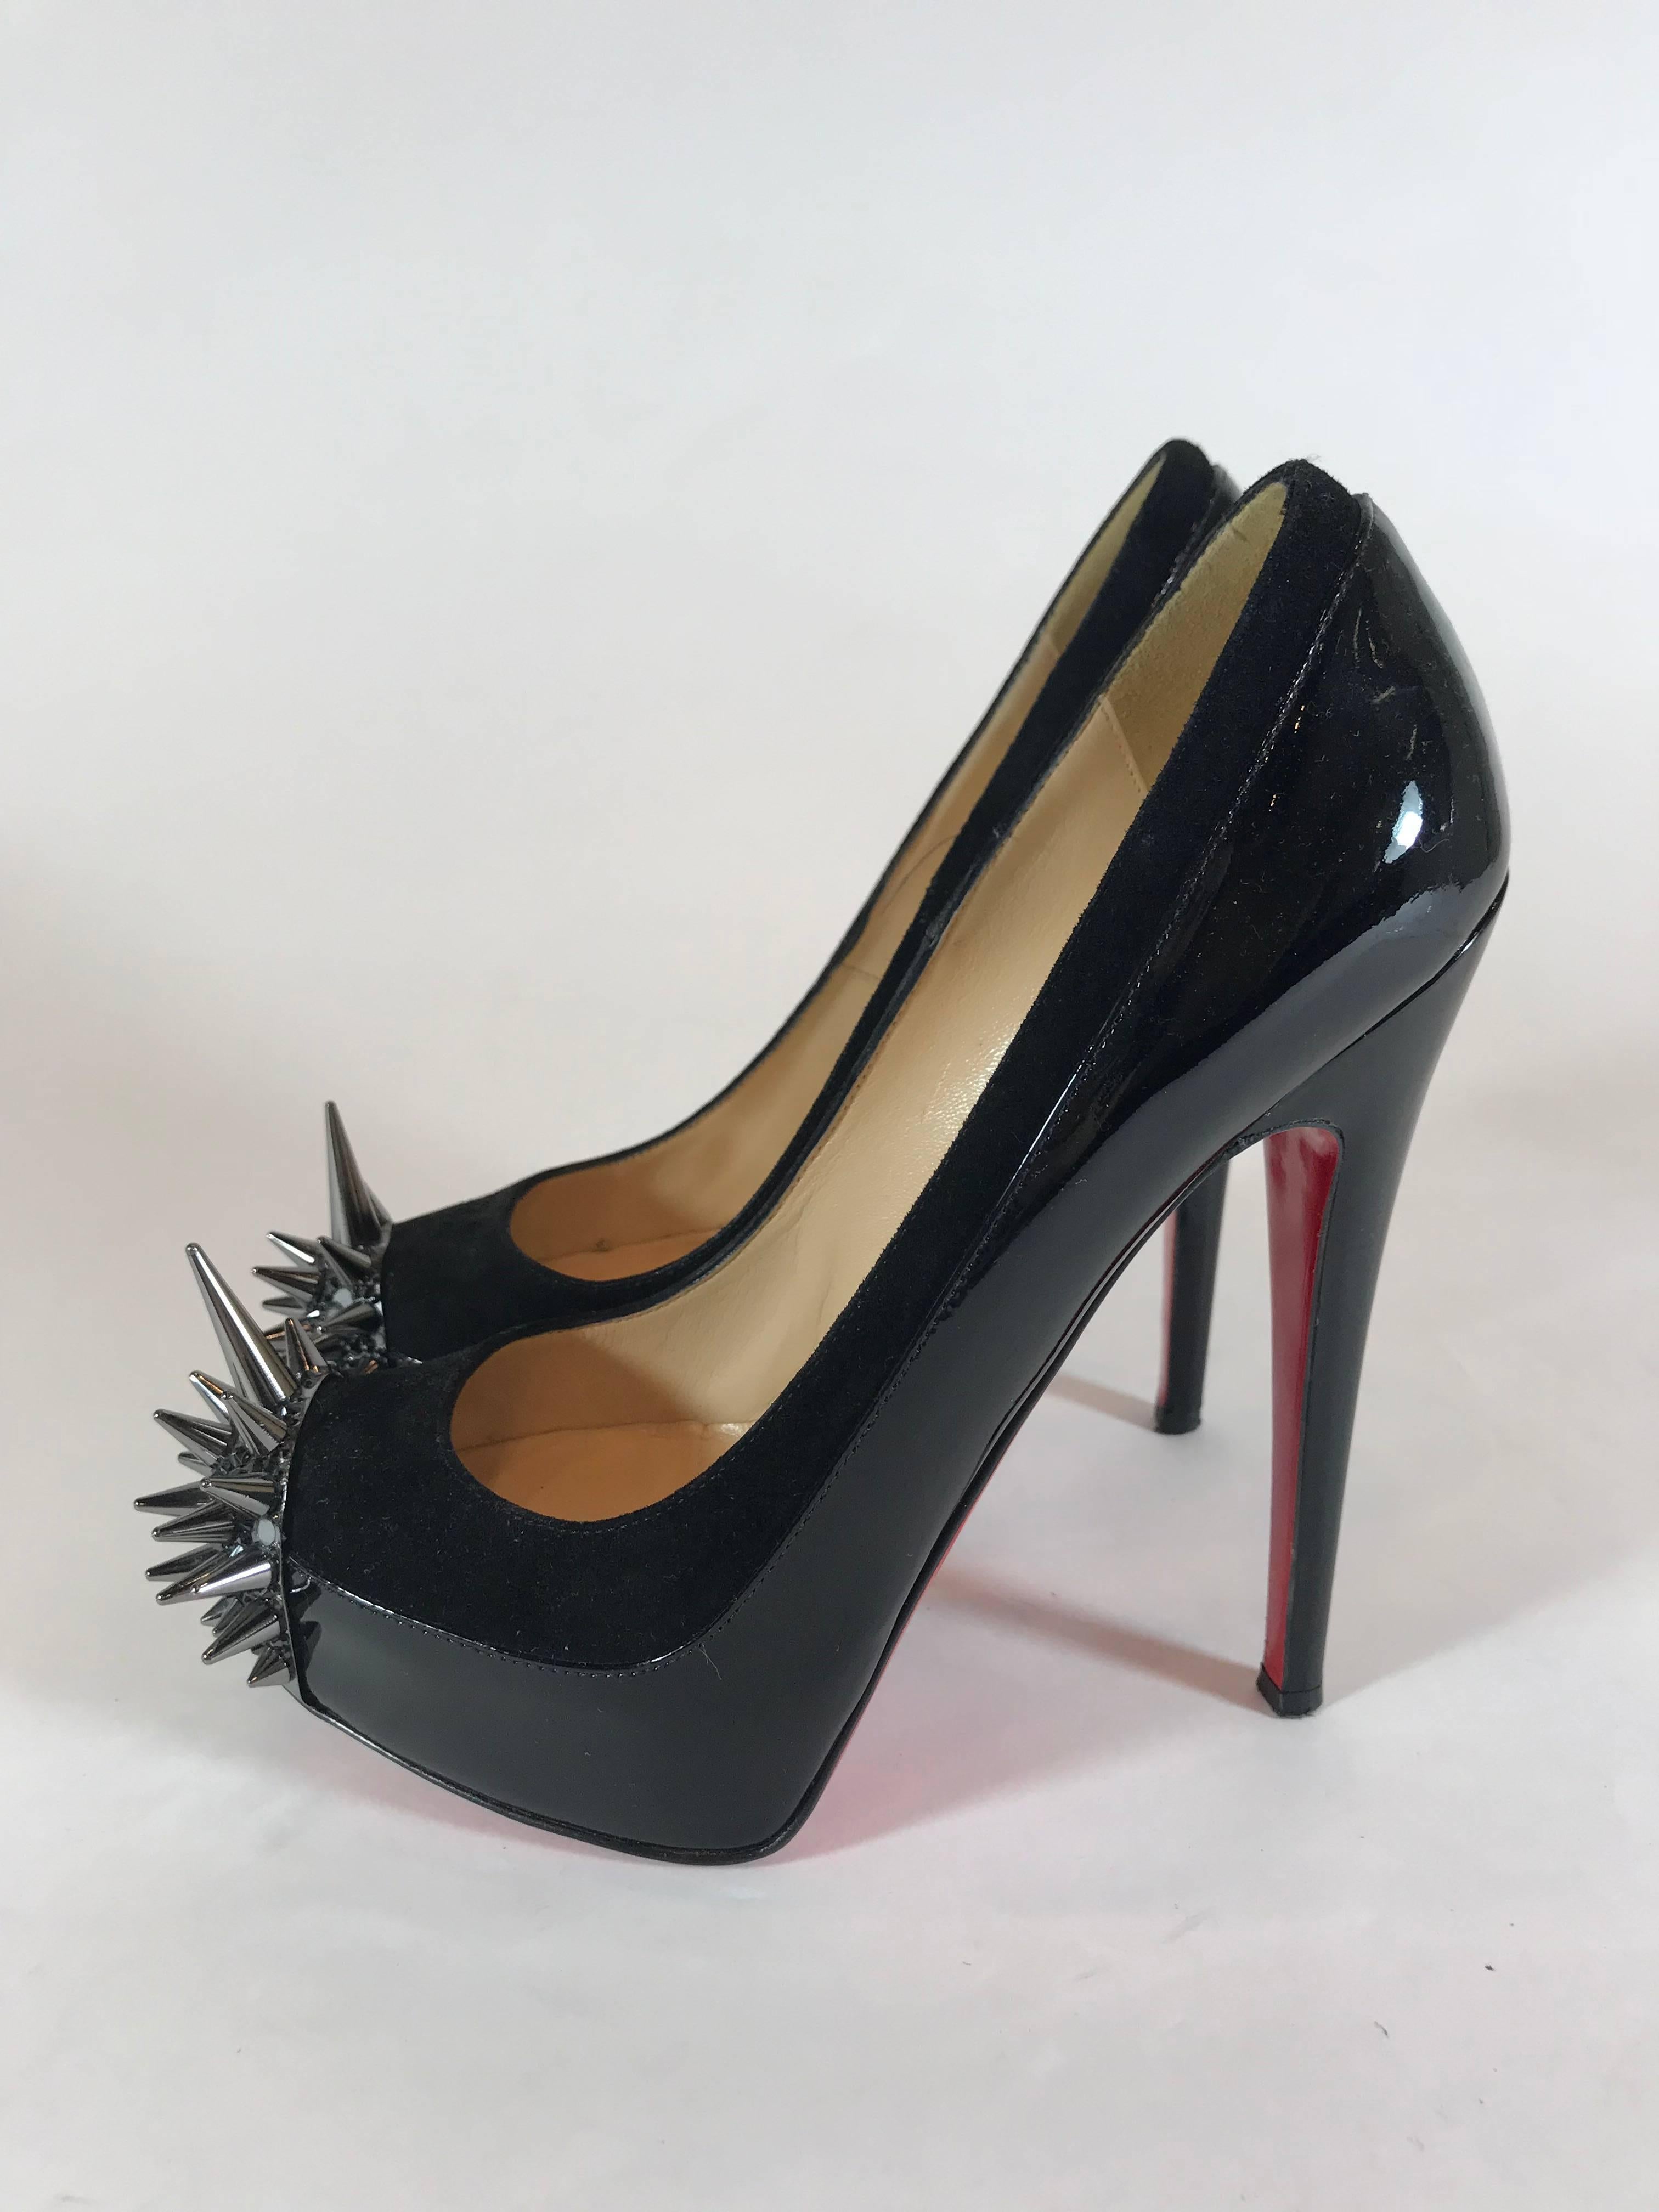 Suede and patent calfskin form classic pump silhouette. Sharp spikes and crystals encrust almond toe. 6 1/4